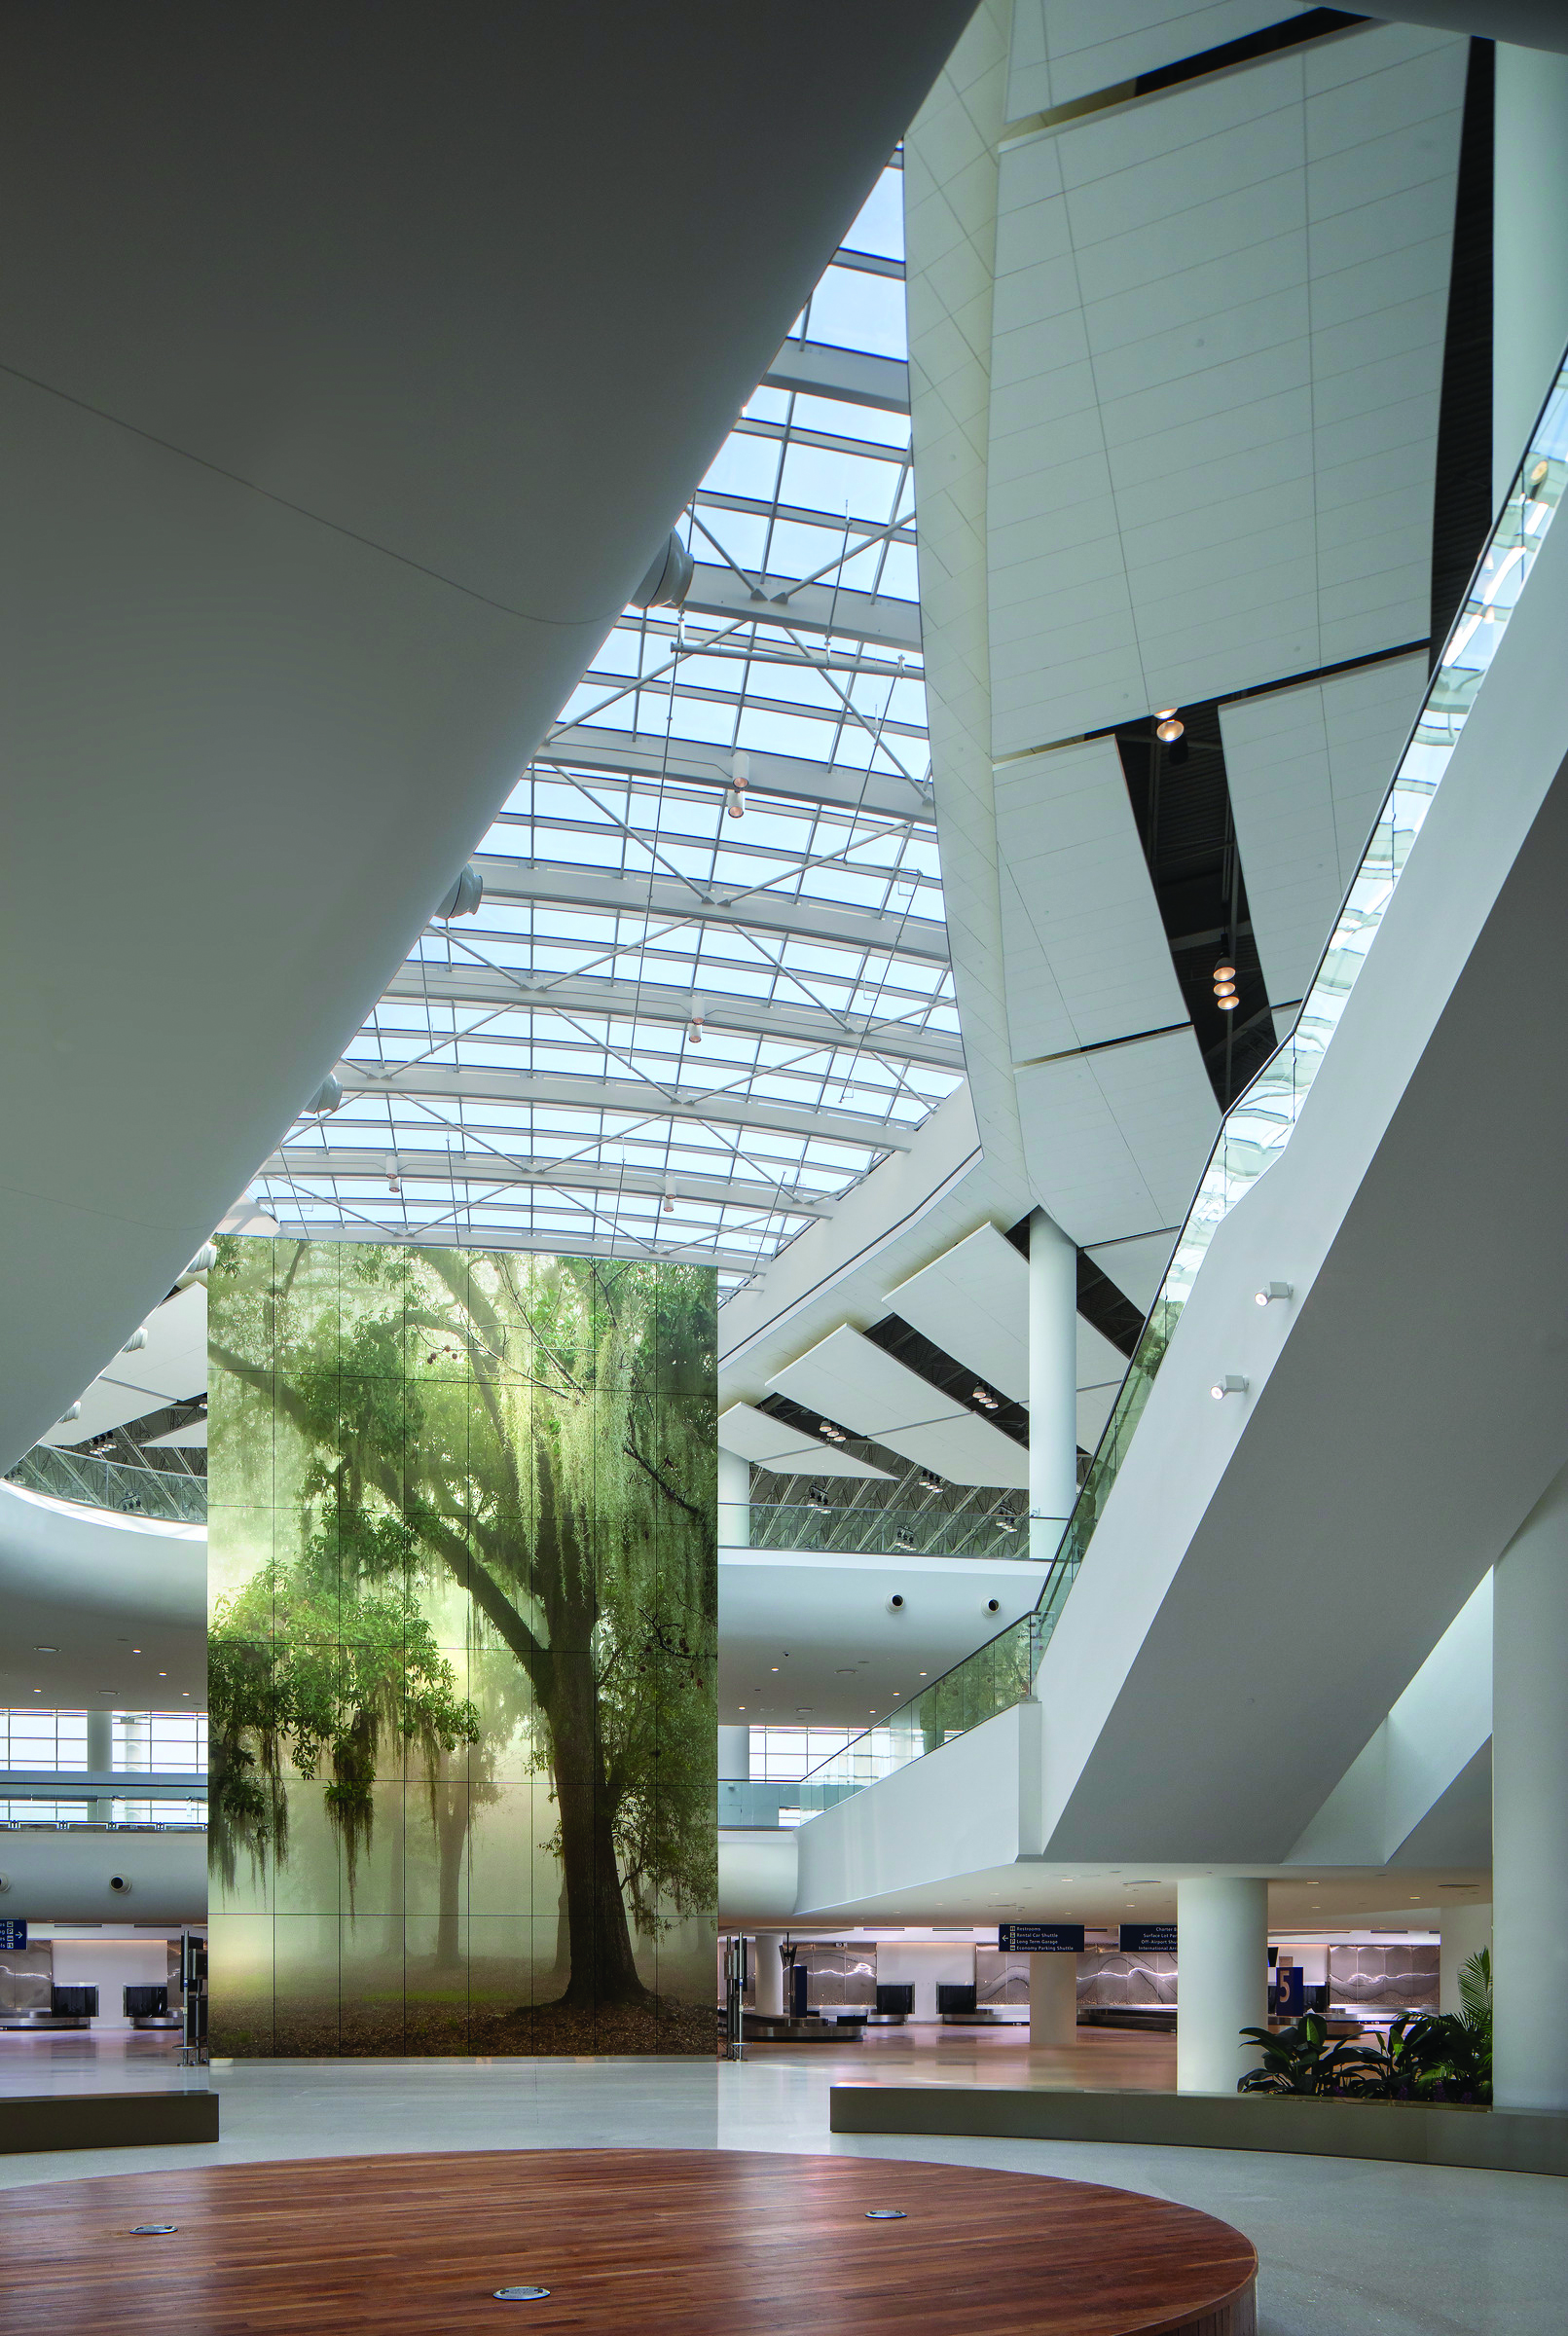 photo of the new terminal at the Louis Armstrong New Orleans International Airport showing its artwork, geometric angles, and skylight roof